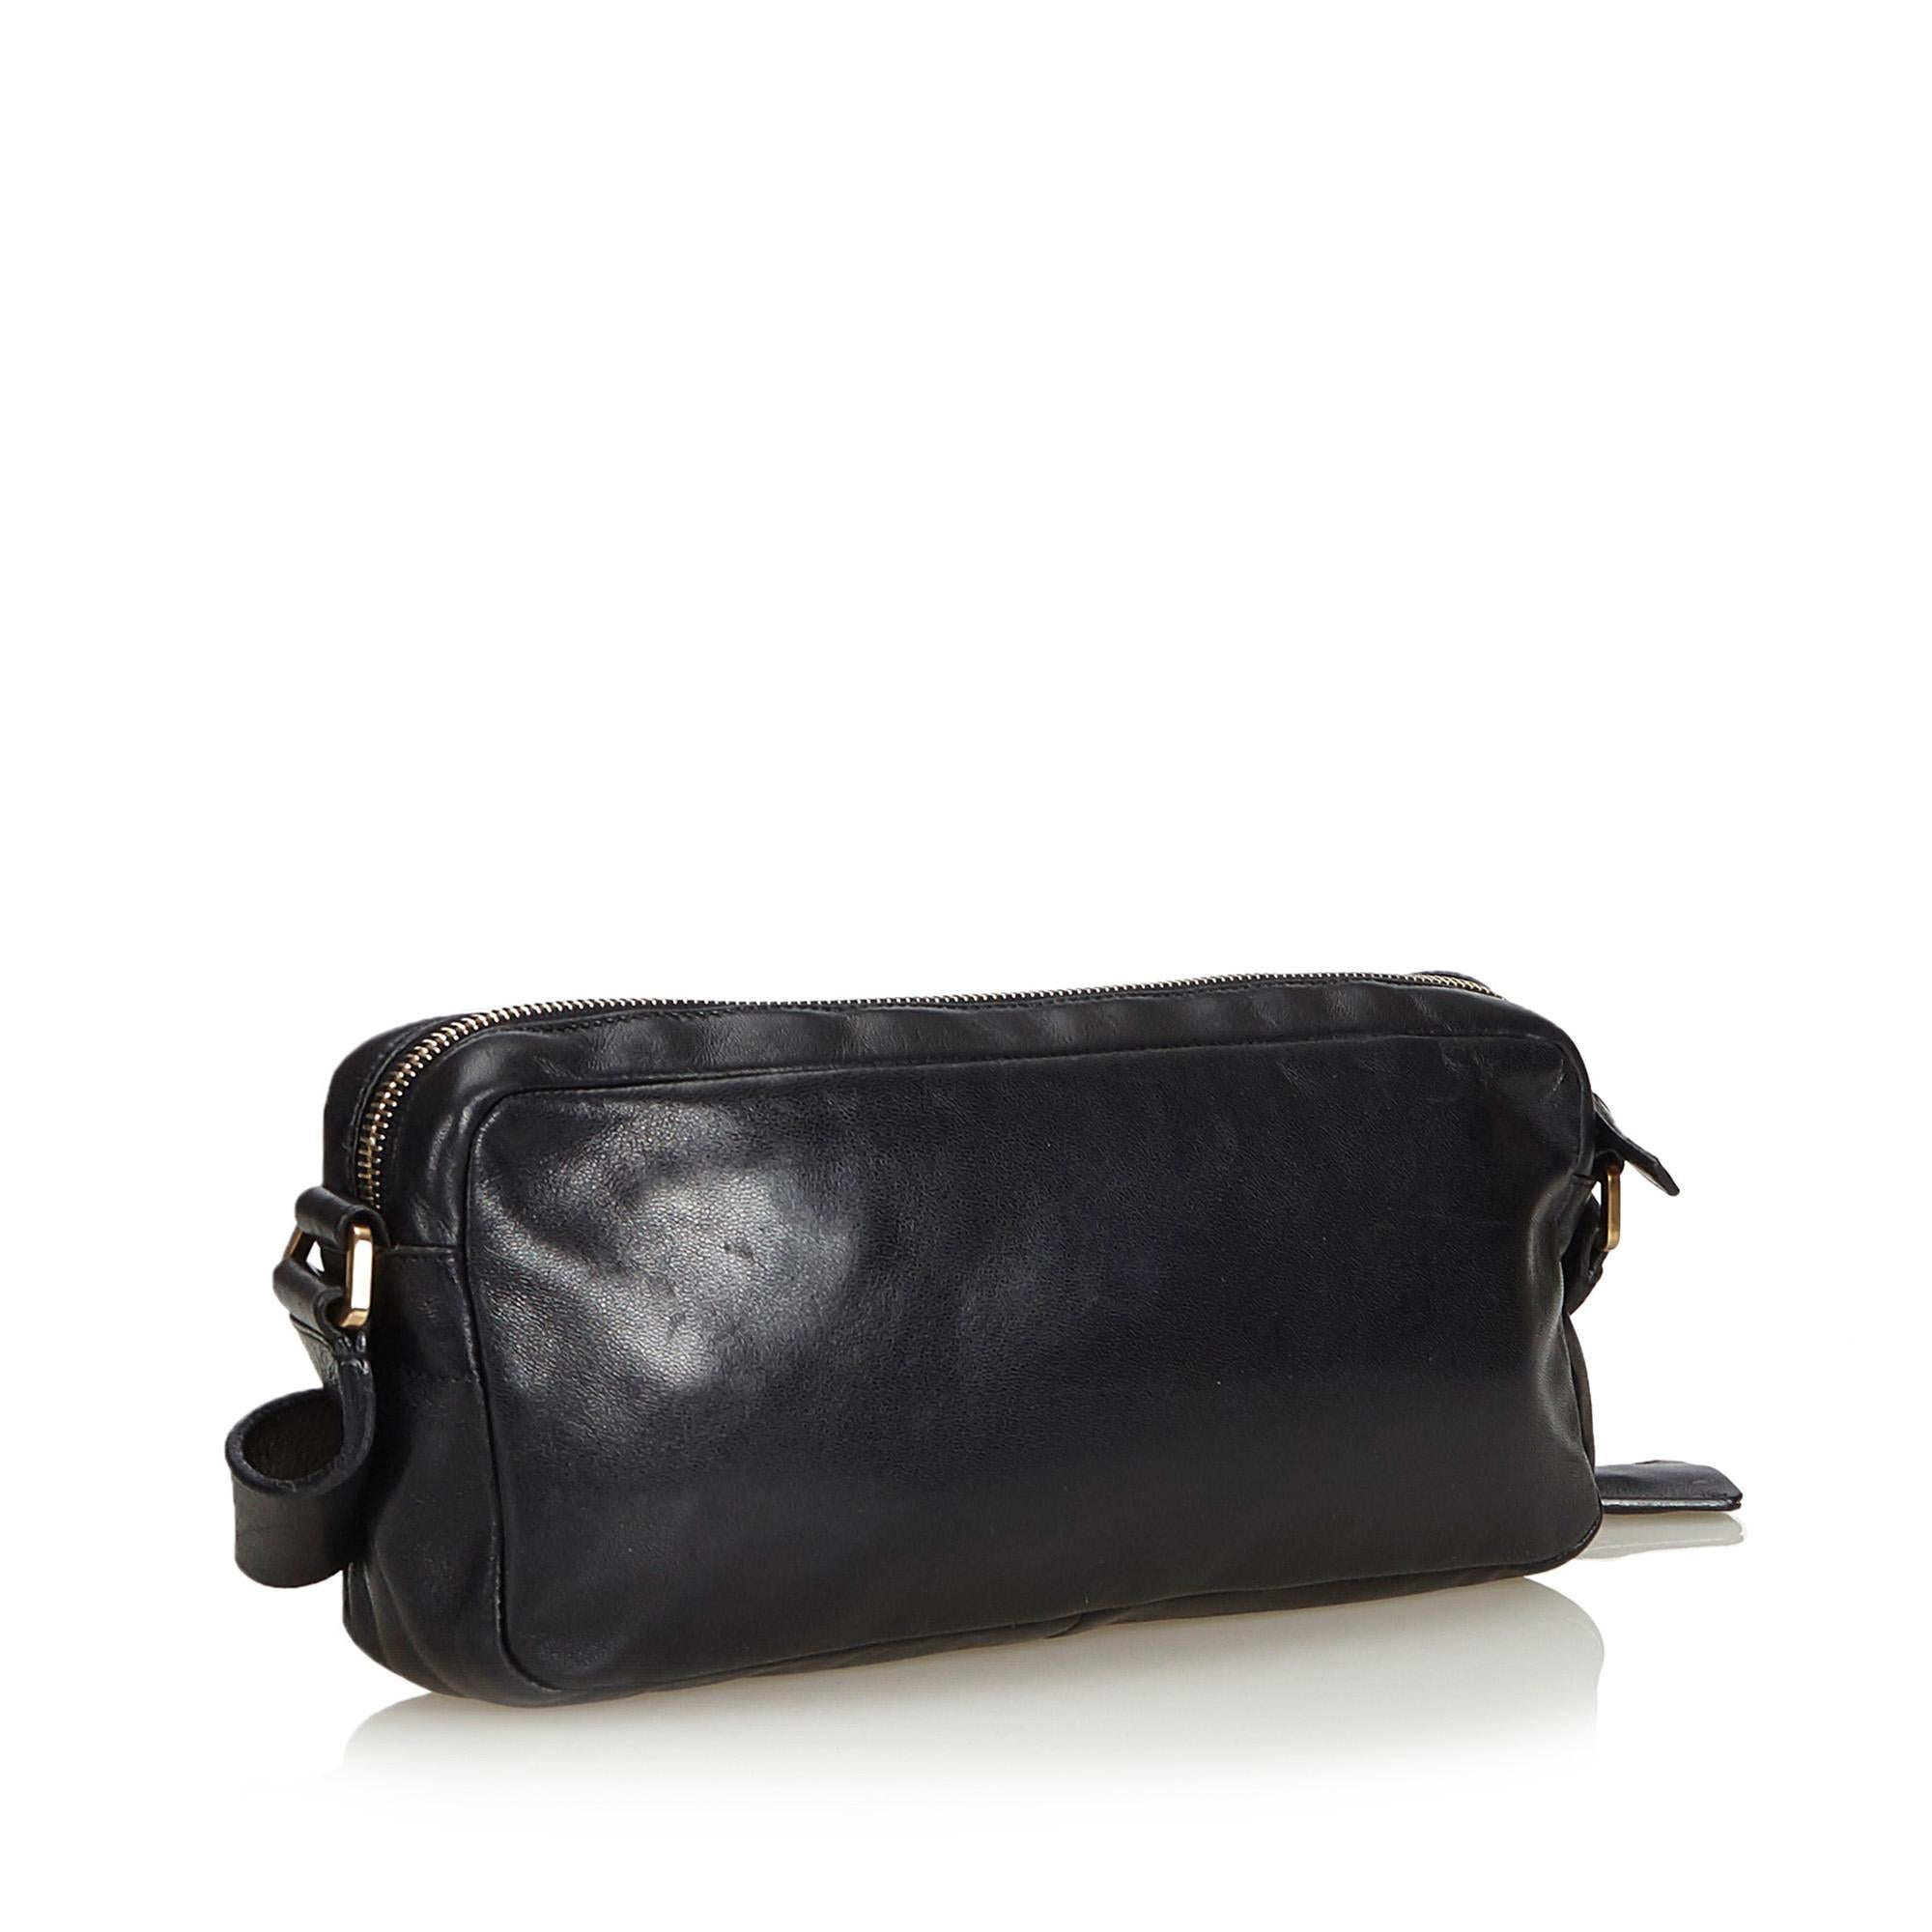 This baguette features a leather body, a front exterior slip pocket, a flat leather strap with gold-tone hardware, a top zip closure, and an interior zip pocket. It carries as B+ condition rating.

Inclusions: 
This item does not come with